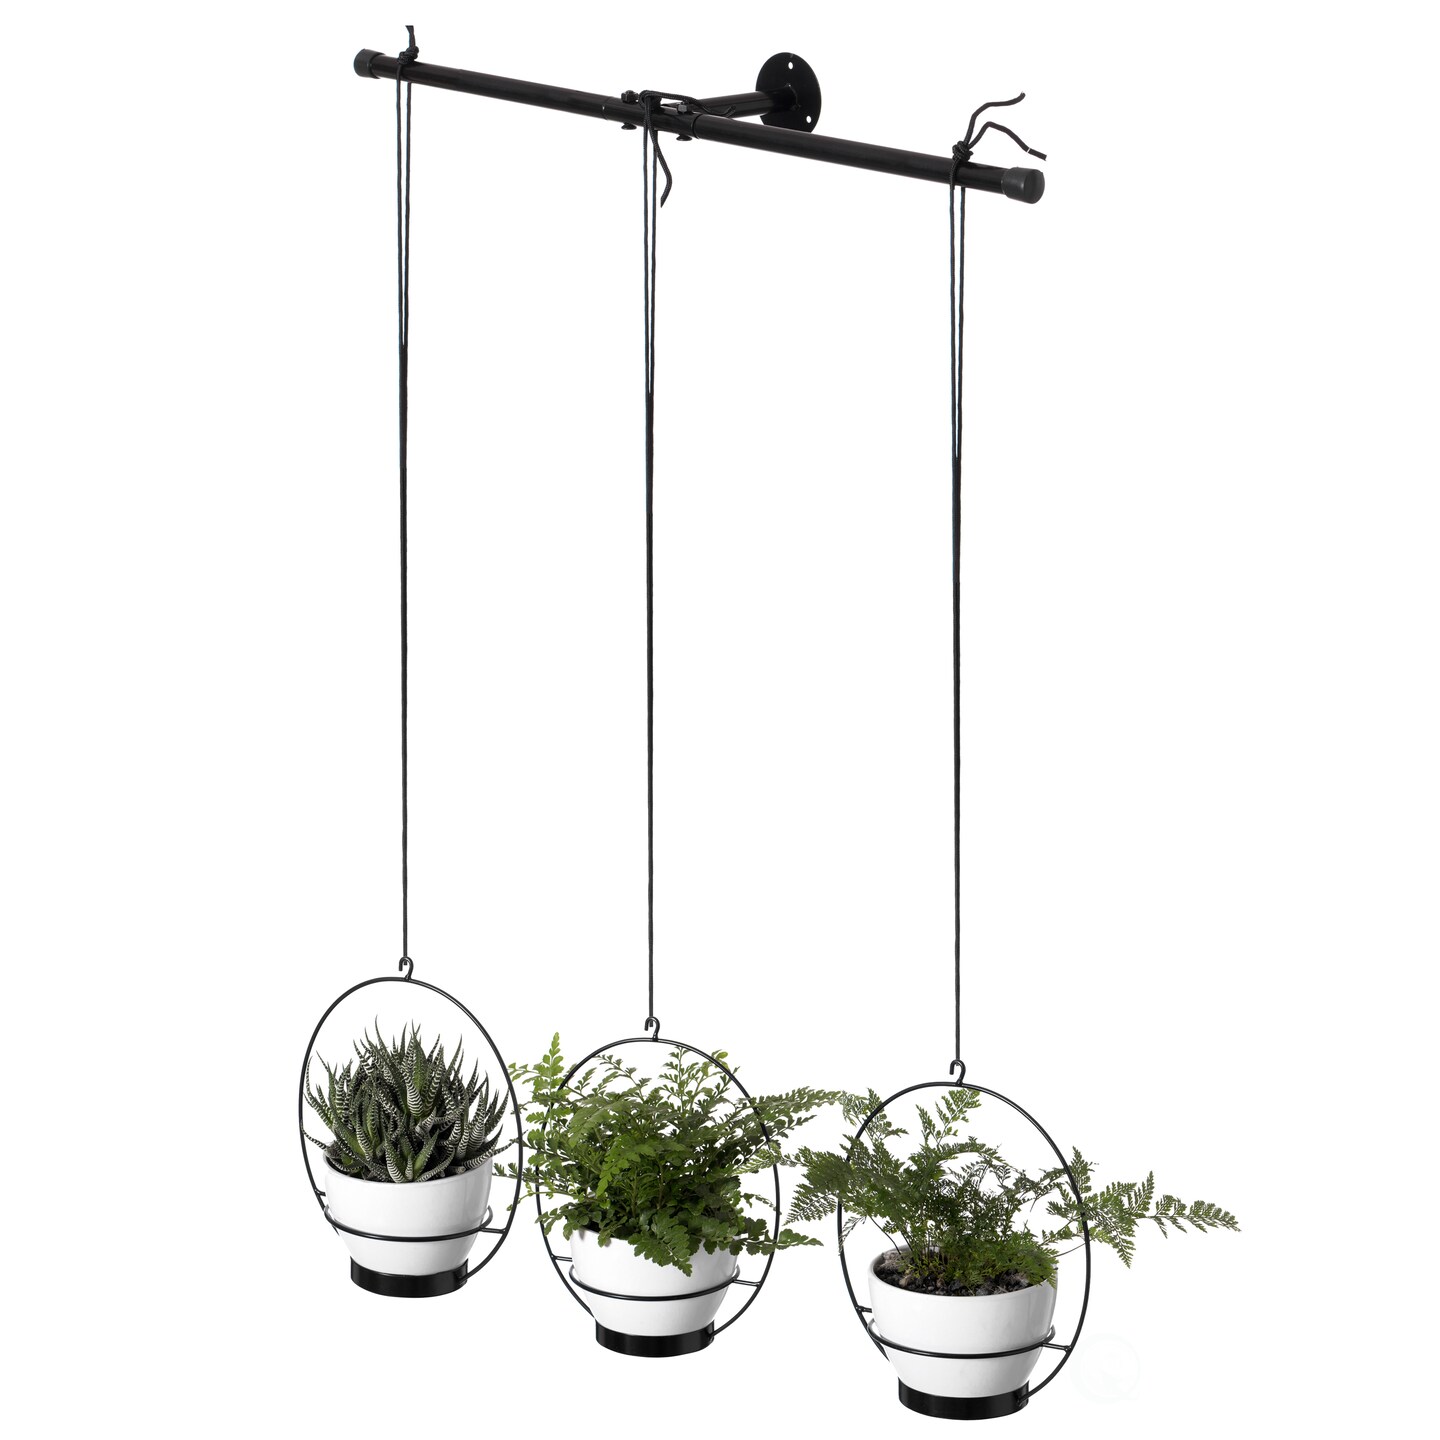 Gardenised Decorative Metal Hanging Planter with Tree Pots for Flowers White and Black